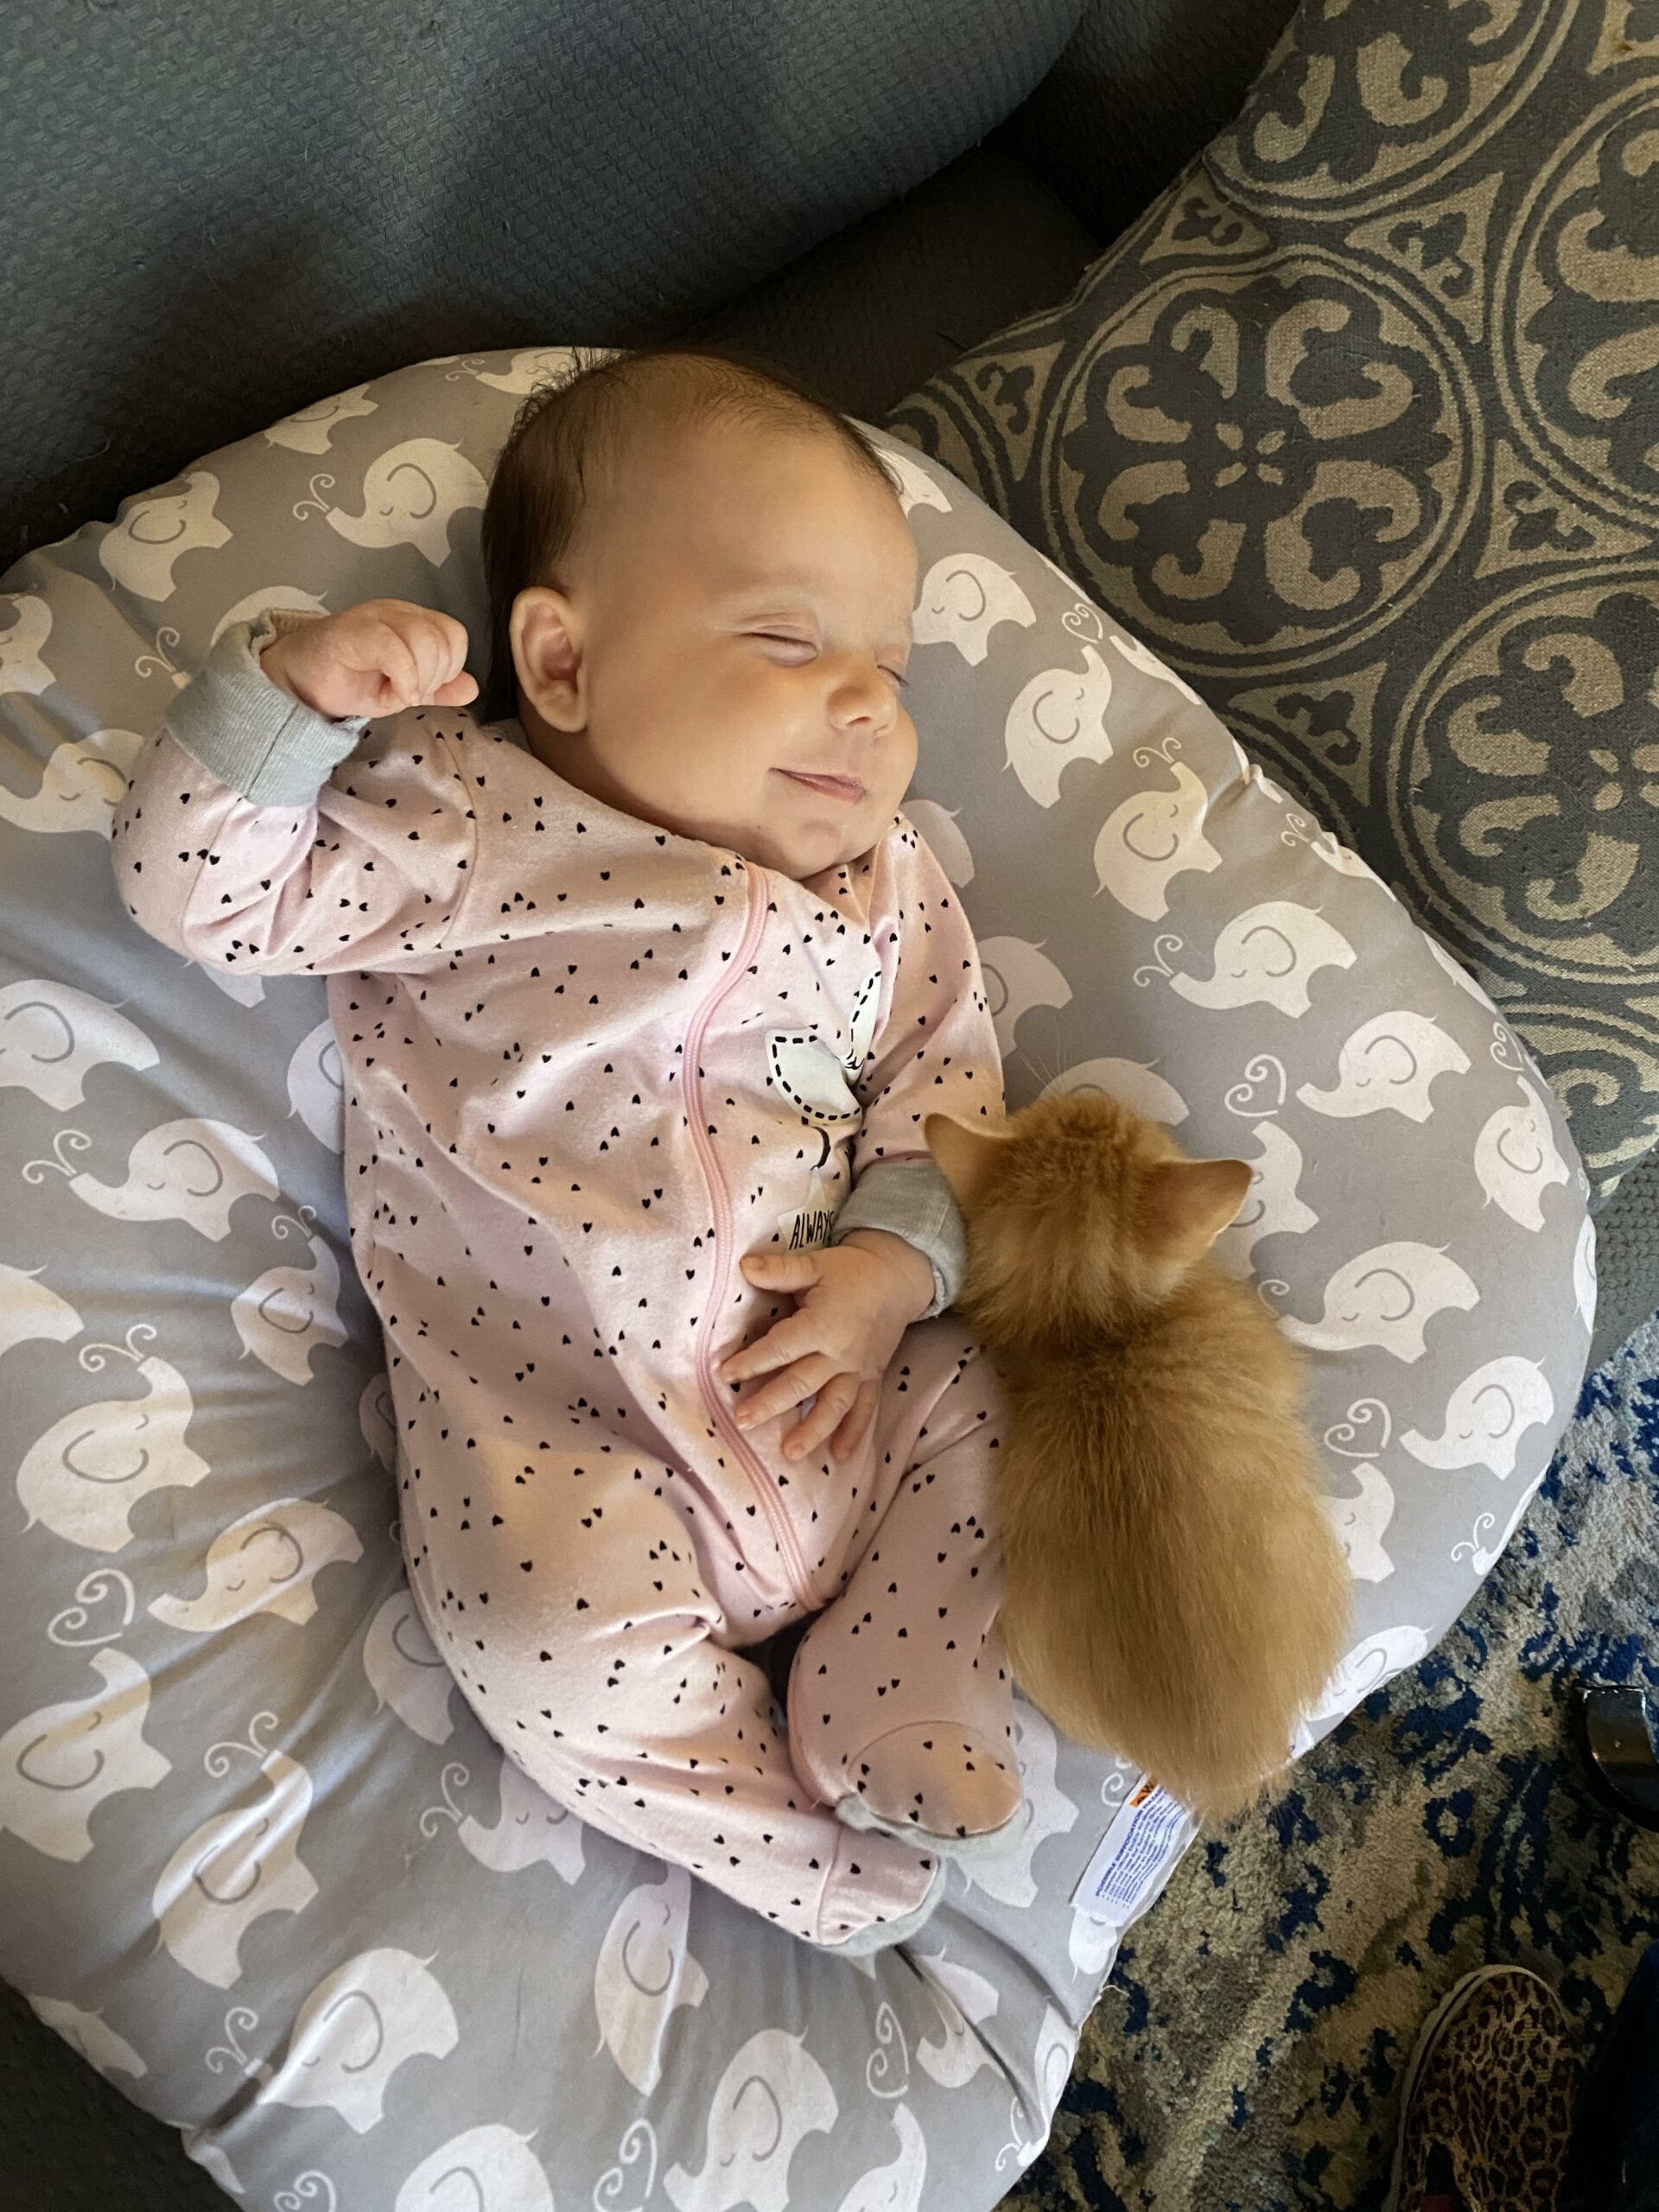 baby smiling in sleep with small orange kitten curled against her